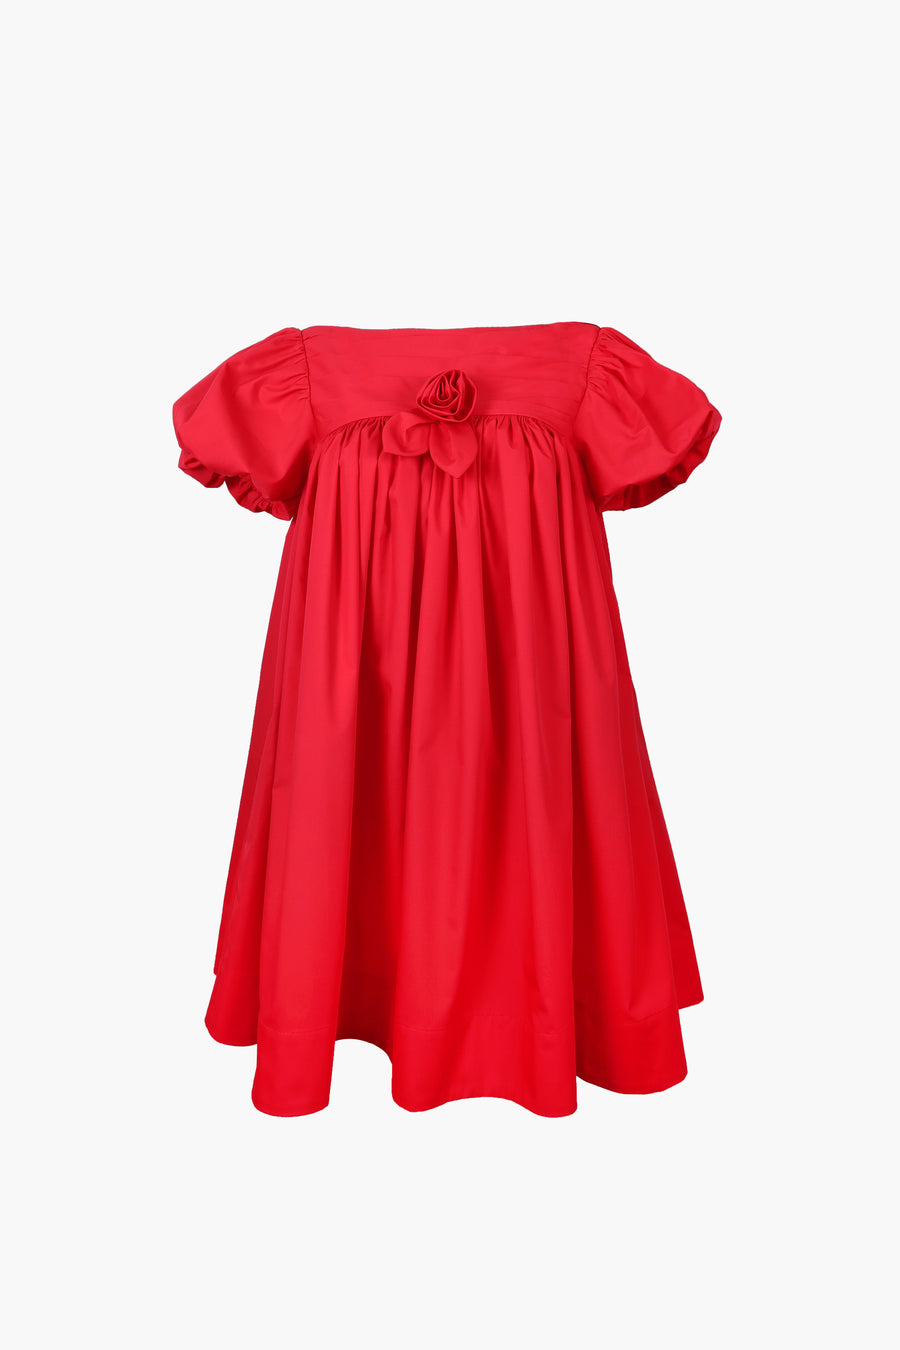 Babydoll mini dress with puffed sleeves in red on model